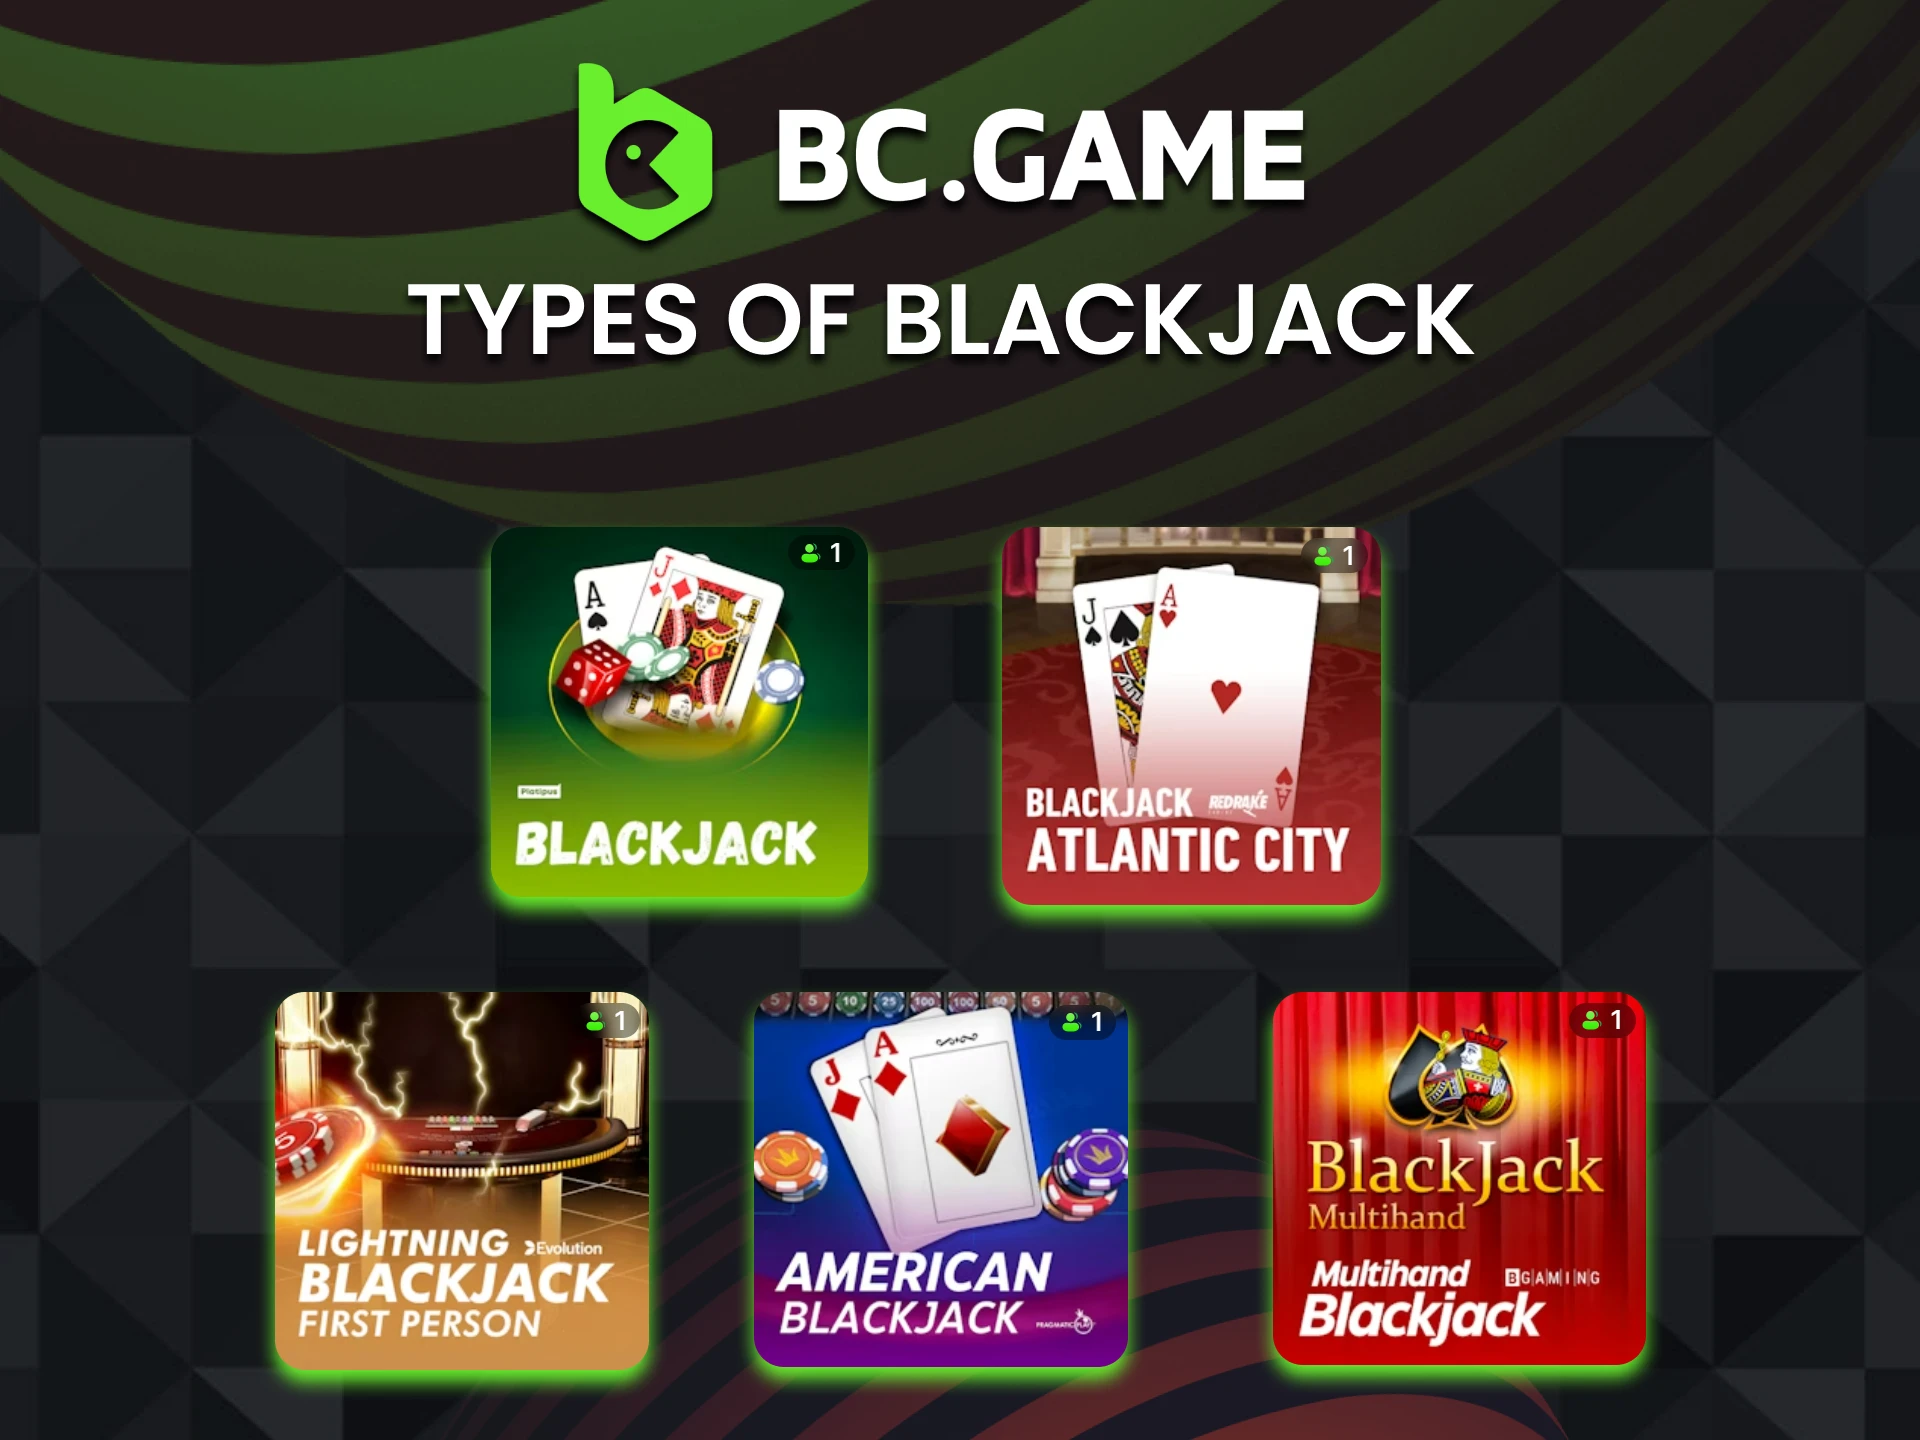 There are many variations of blackjack games at BC Game Casino.